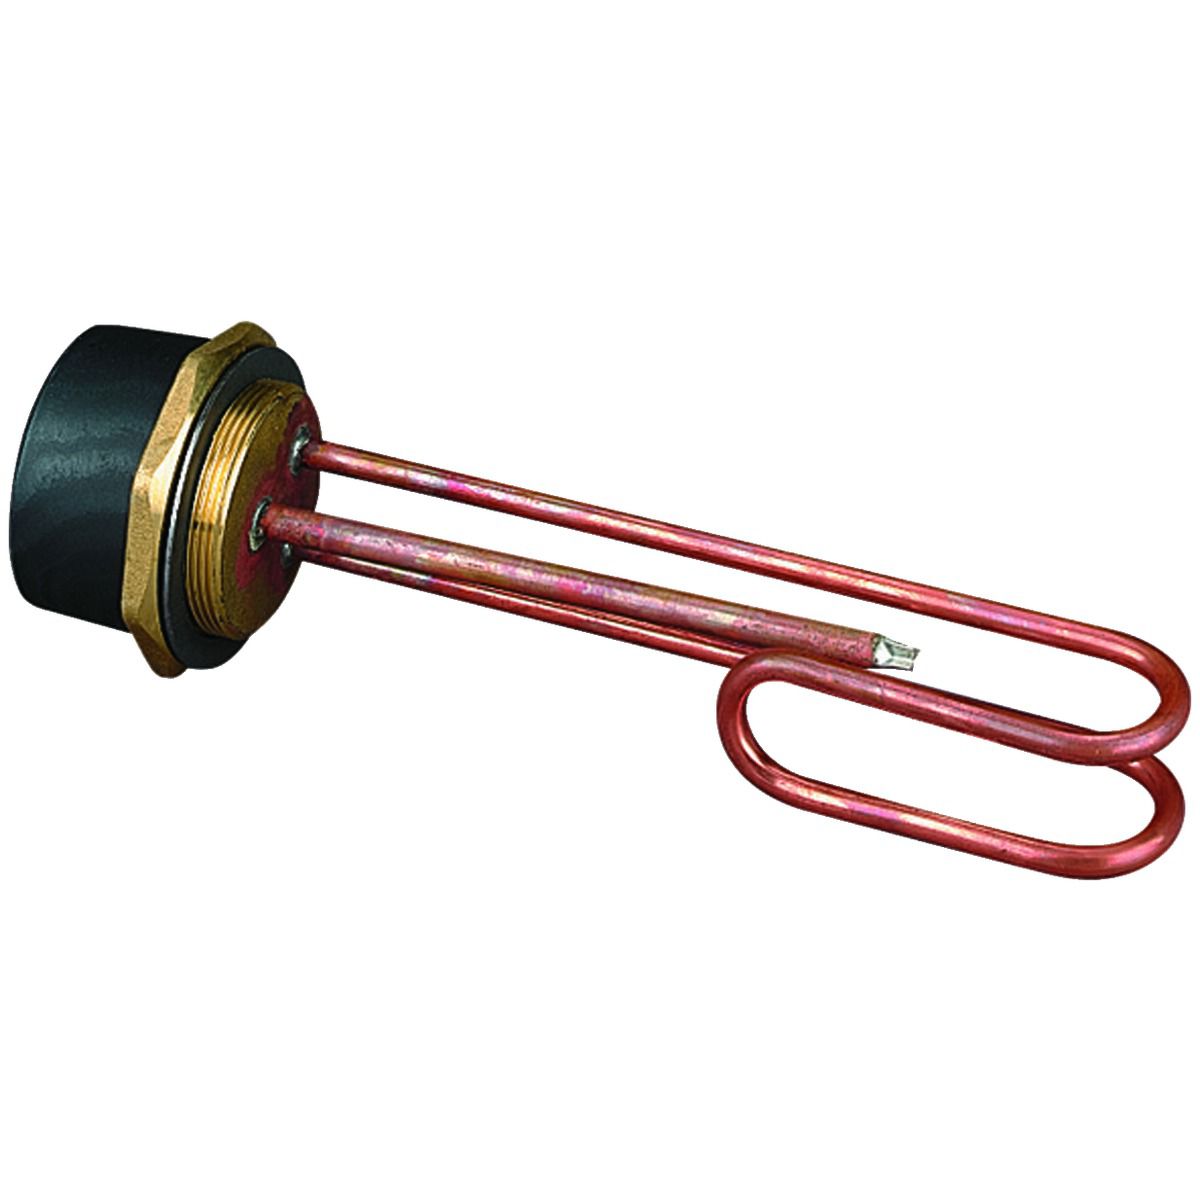 Image of Primaflow Copper Cylinder Immersion Heating Element - 11in